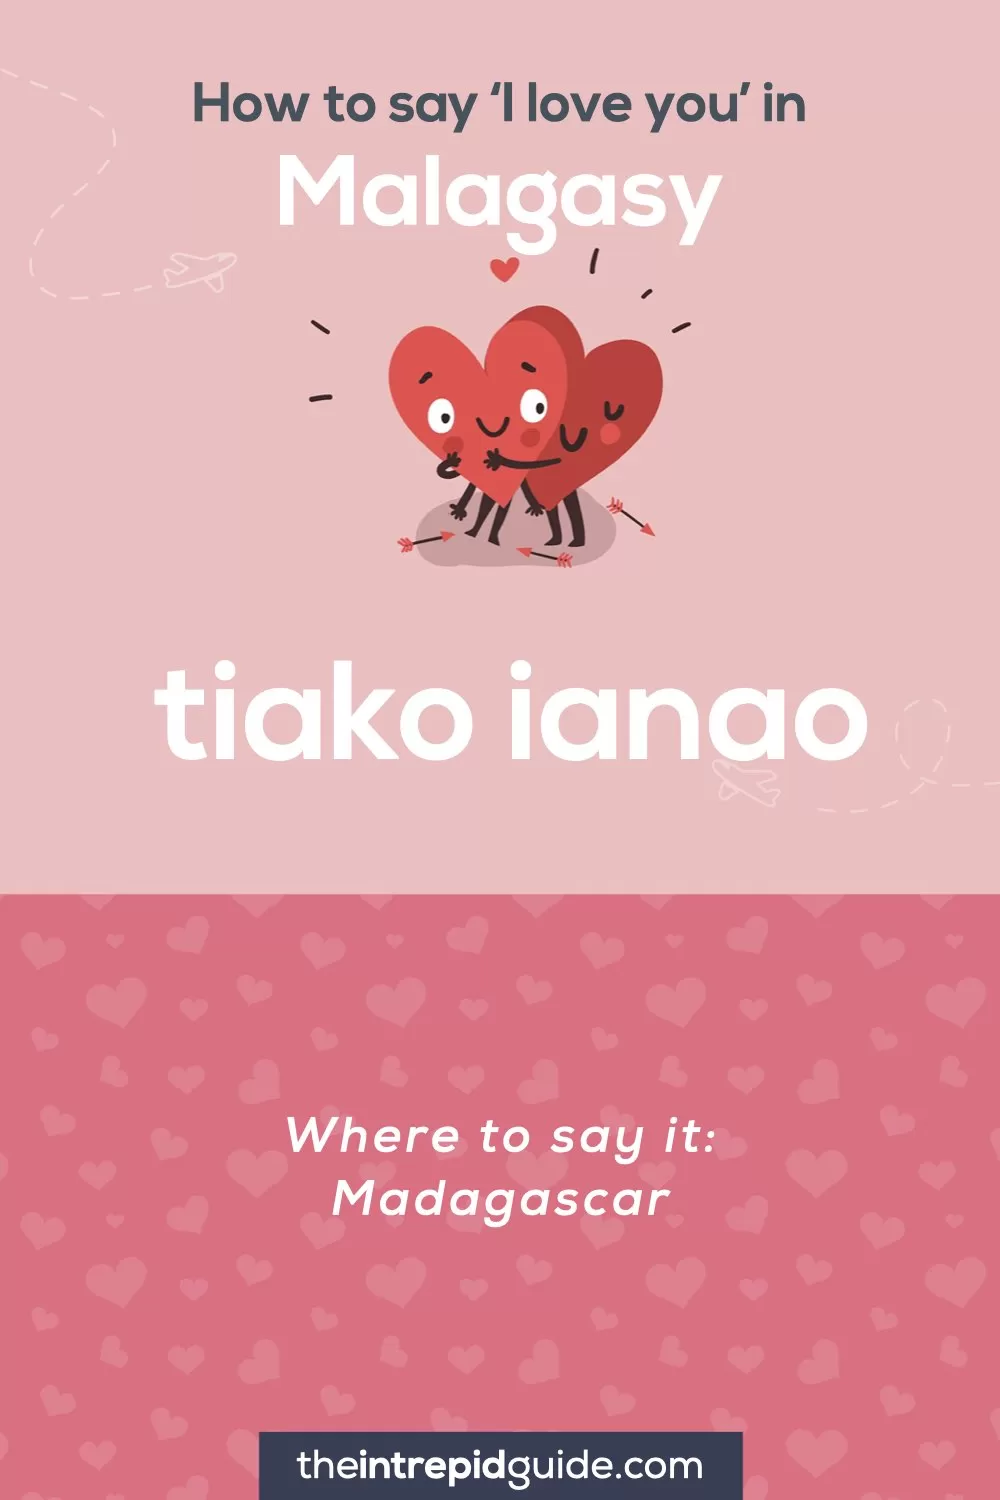 How to say I love you in different languages - Malagasy - tiako ianao